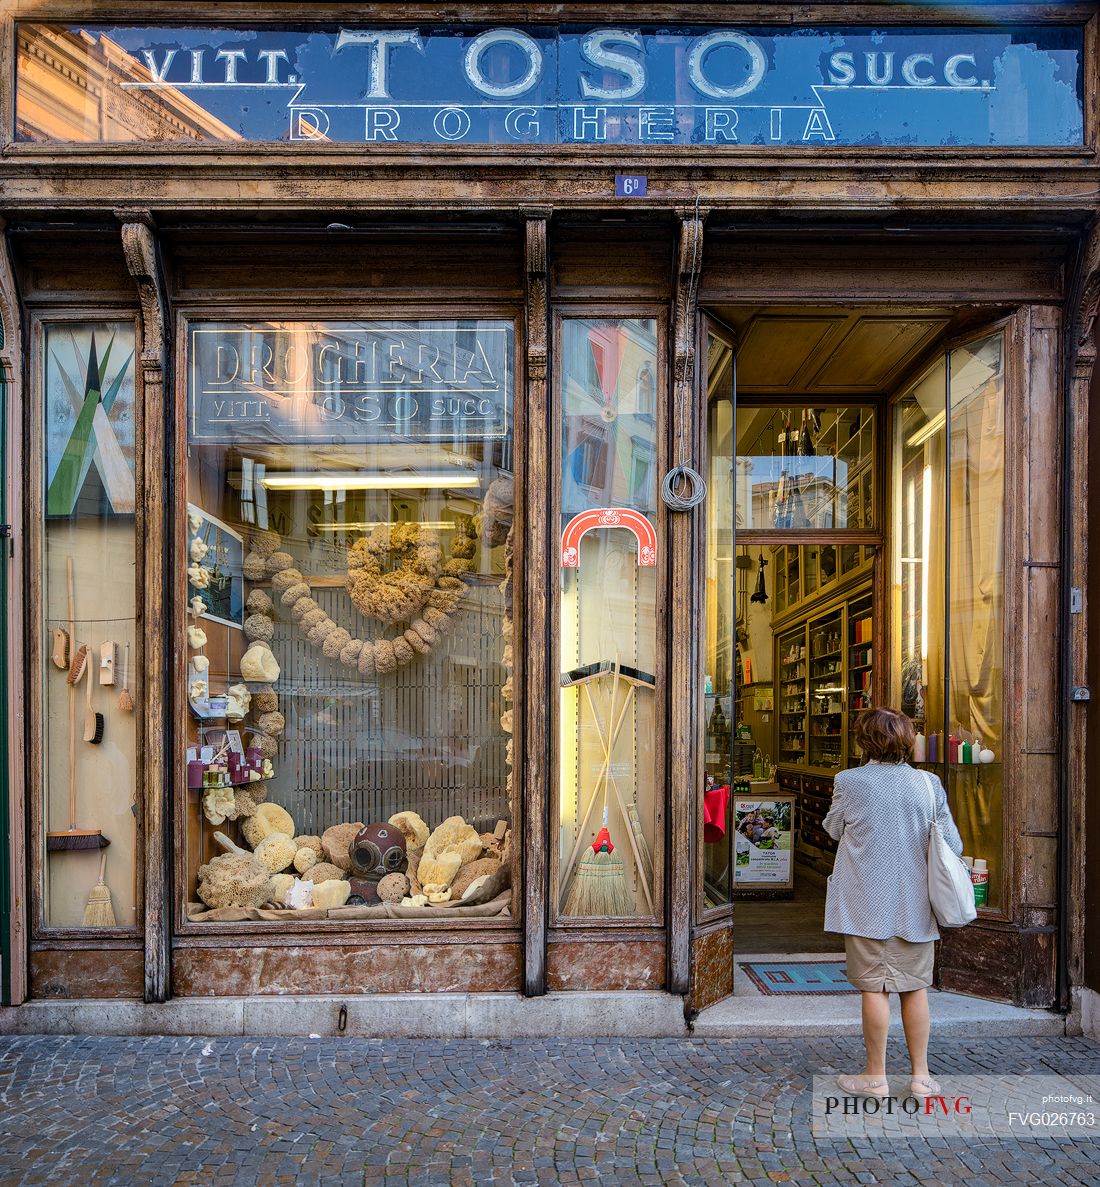 The exterior facade of the historic Toso grocery store, dating back to 1906 with marine sponges, vintage billboards and an old diving equipment featured in the showcase, Trieste, Friuli Venezia Giulia, Italy